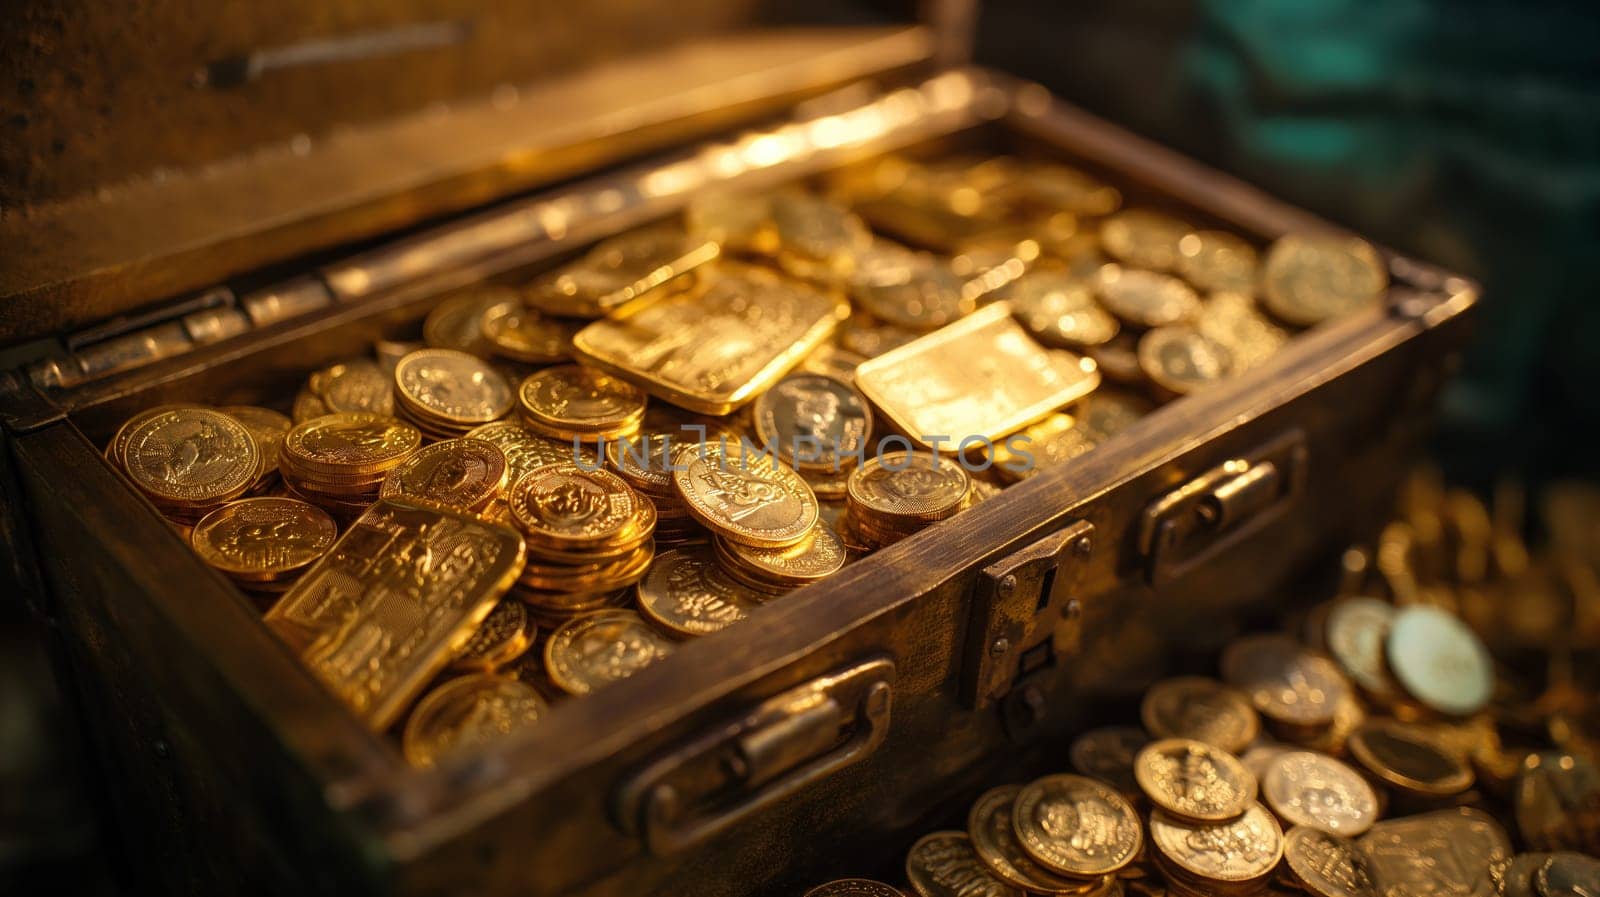 Treasure Chest Overflowing With Gold Coins and Bars by chrisroll